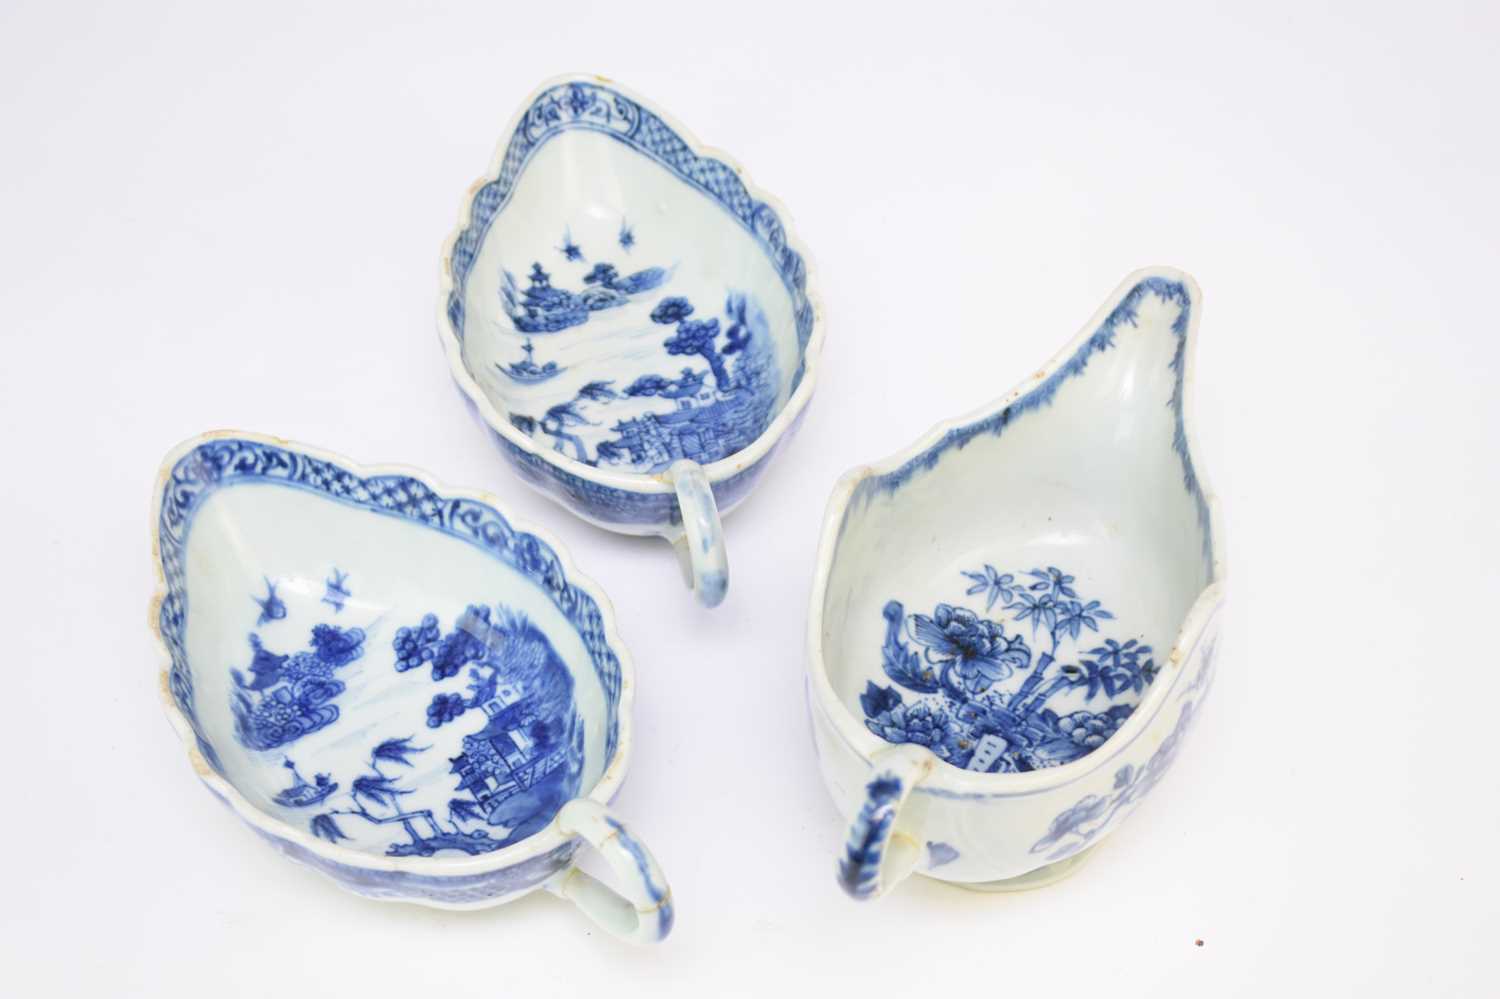 Three Chinese blue and white sauce boats, 18th century - Image 2 of 3